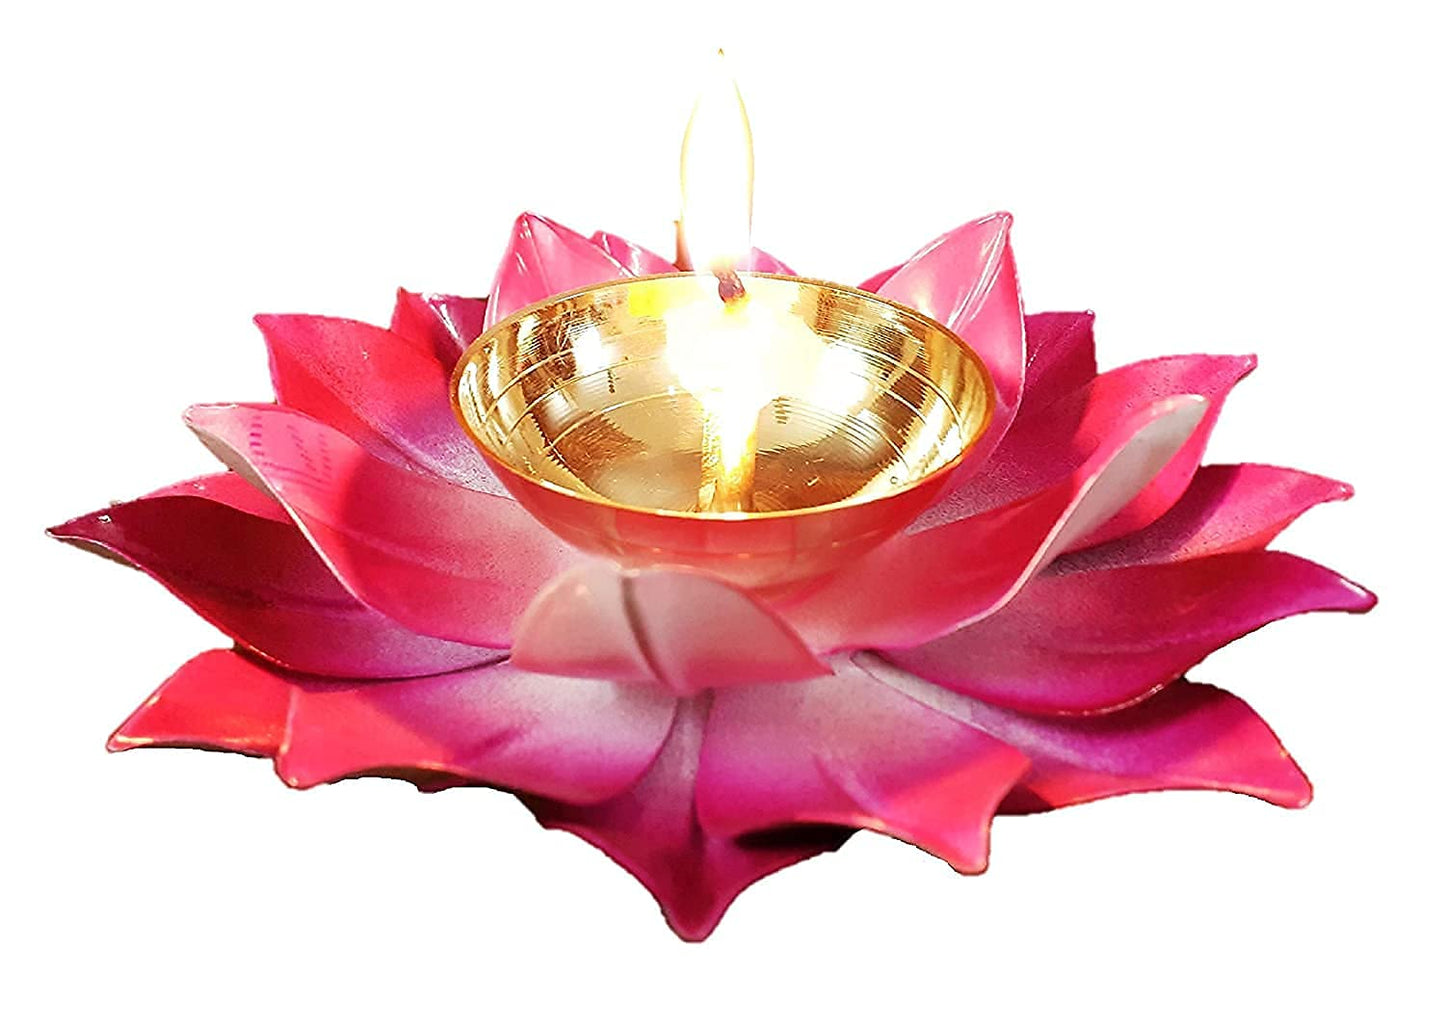 Rudra Exports Lotus Shape Brass Diya for Home Temple Decor Puja Articles Set of 6